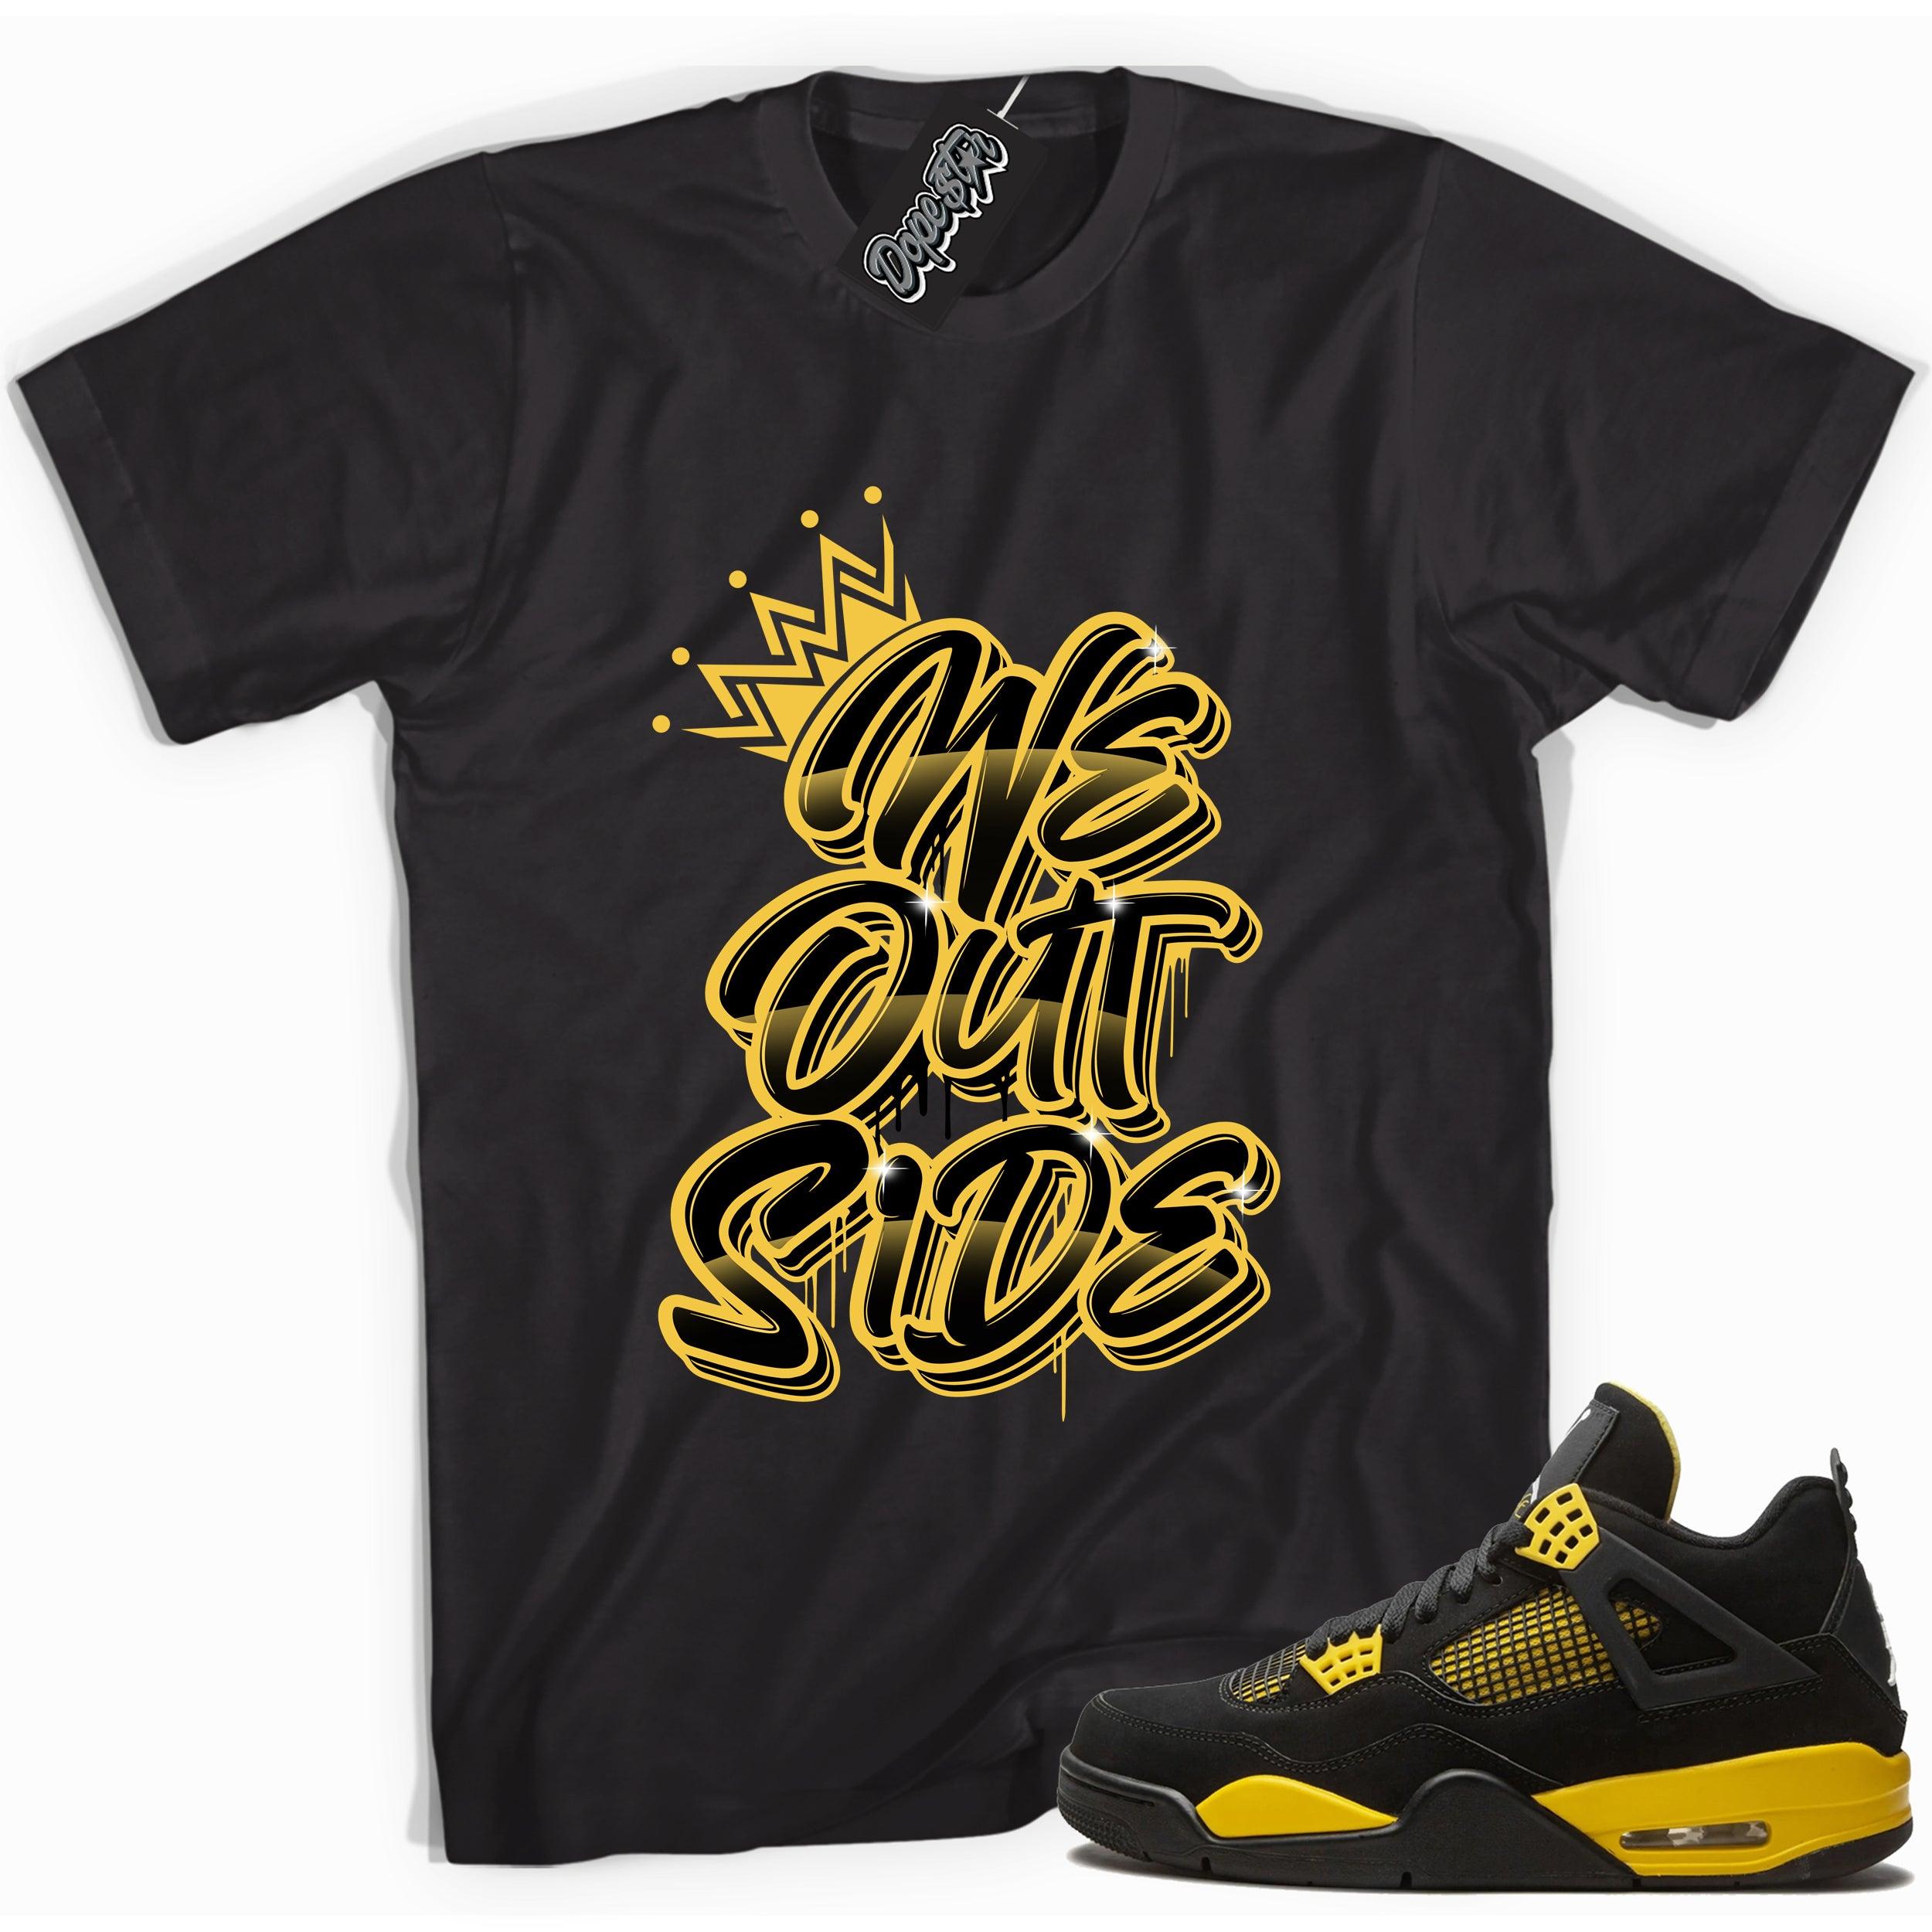 Cool black graphic tee with 'we outside' print, that perfectly matches  Air Jordan 4 Thunder sneakers